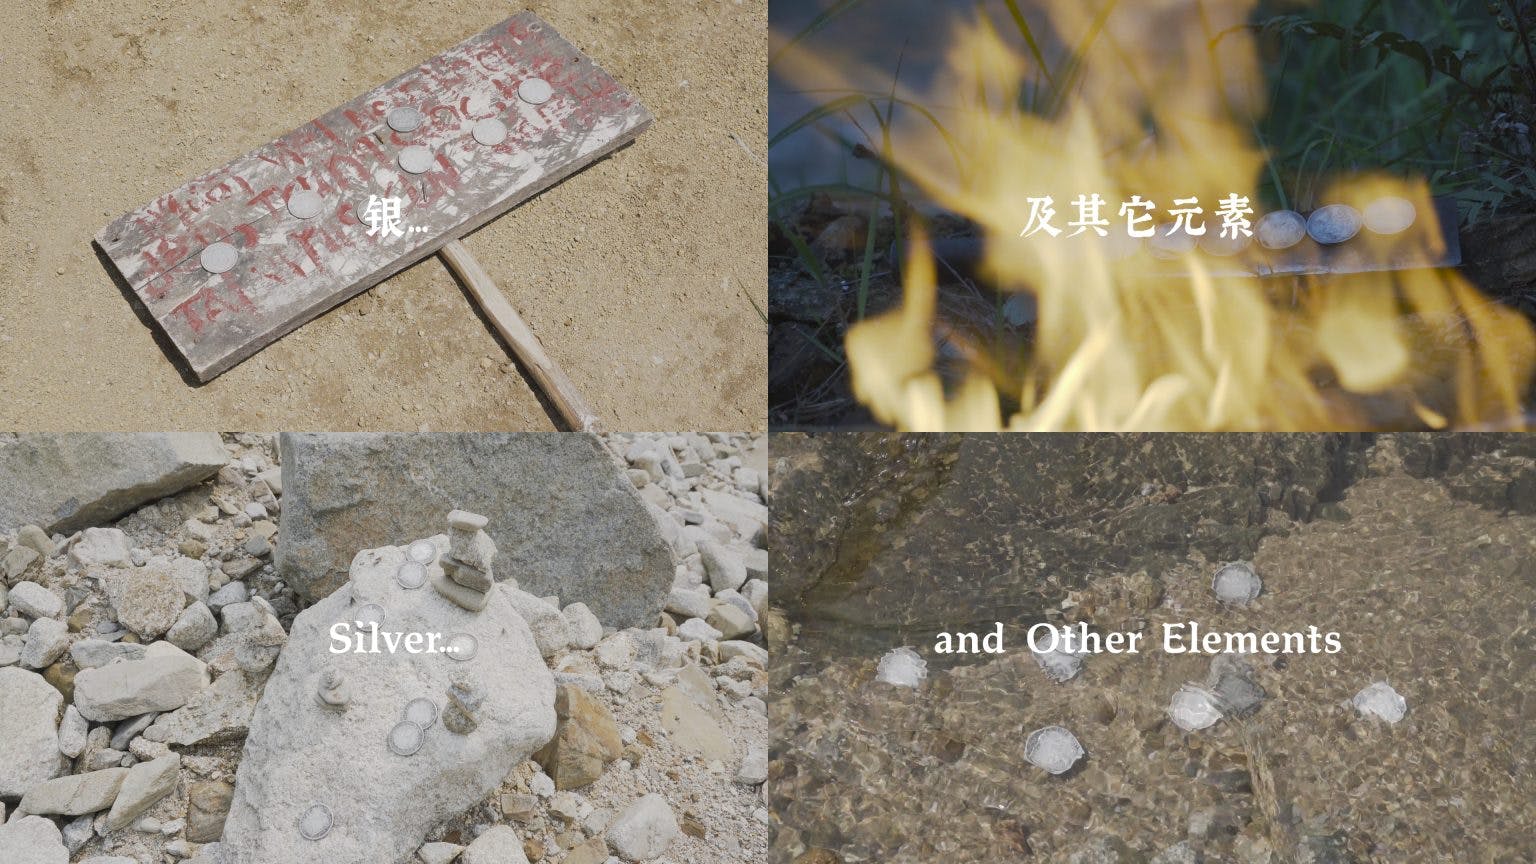 Silver… and Other Elements 銀… 及其它元素